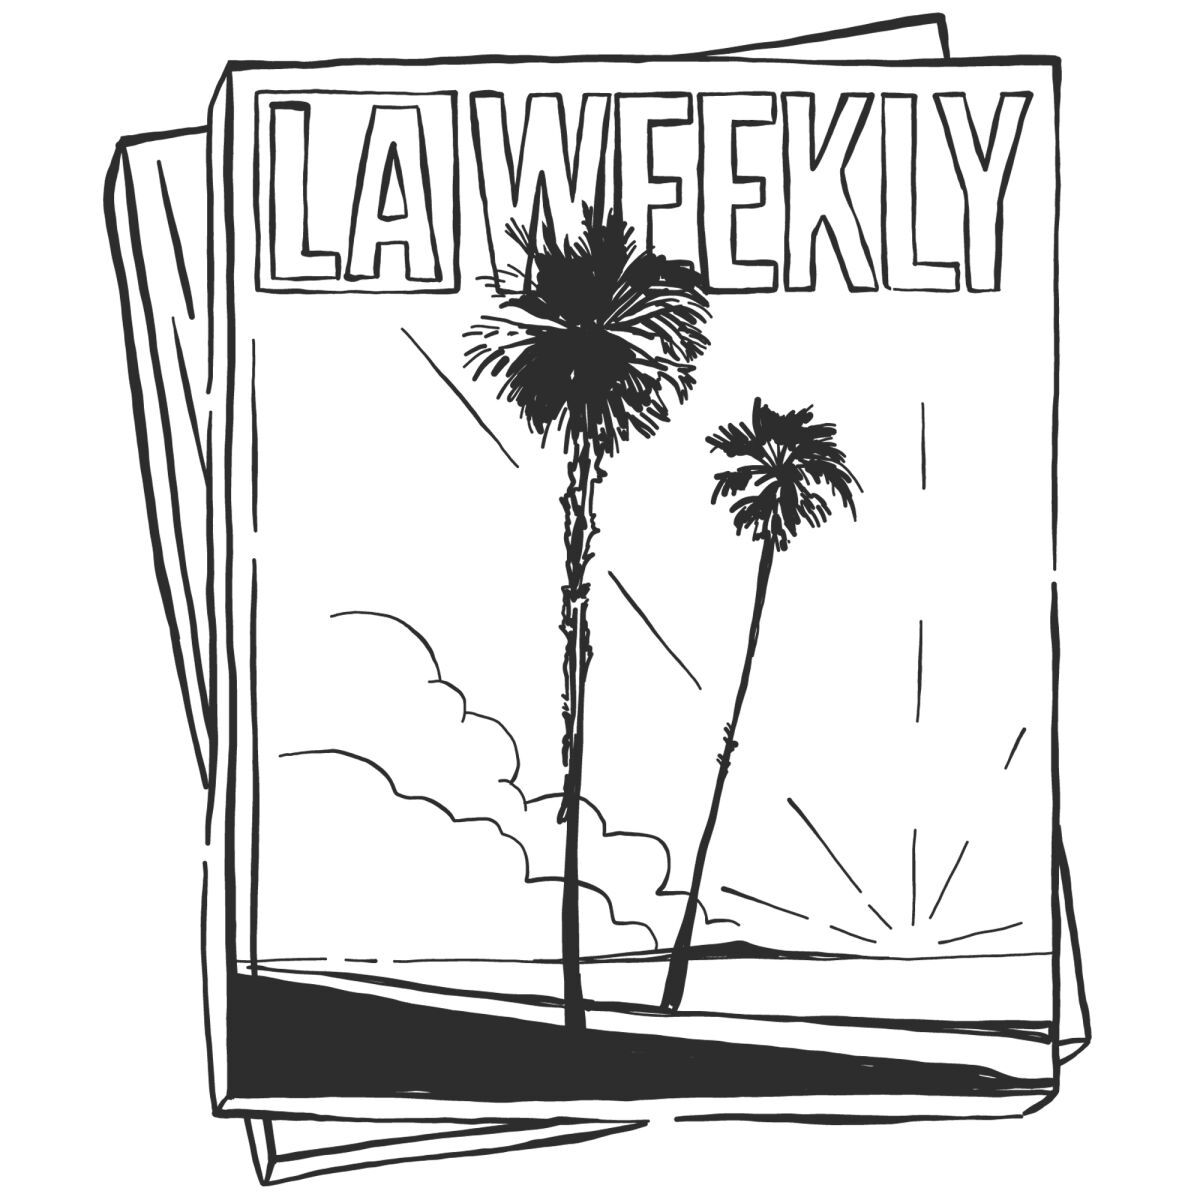 In 2012, Besha Rodell took the helm as food critic at L.A. Weekly, instating a starred rating system before year’s end.